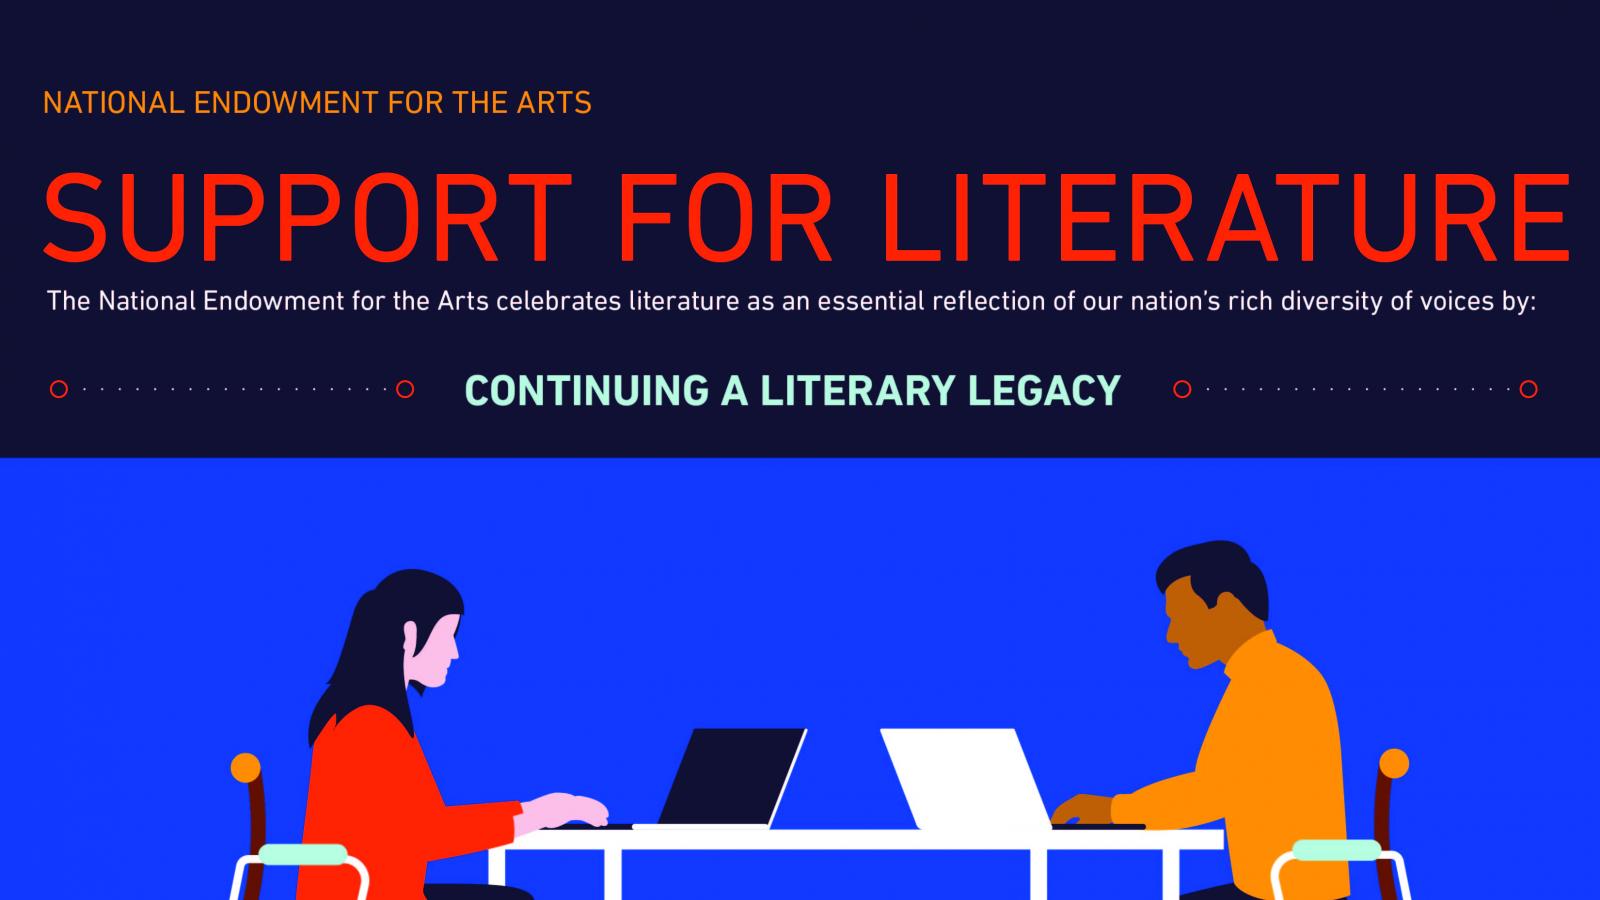 Infographic showing support for literature fellowships